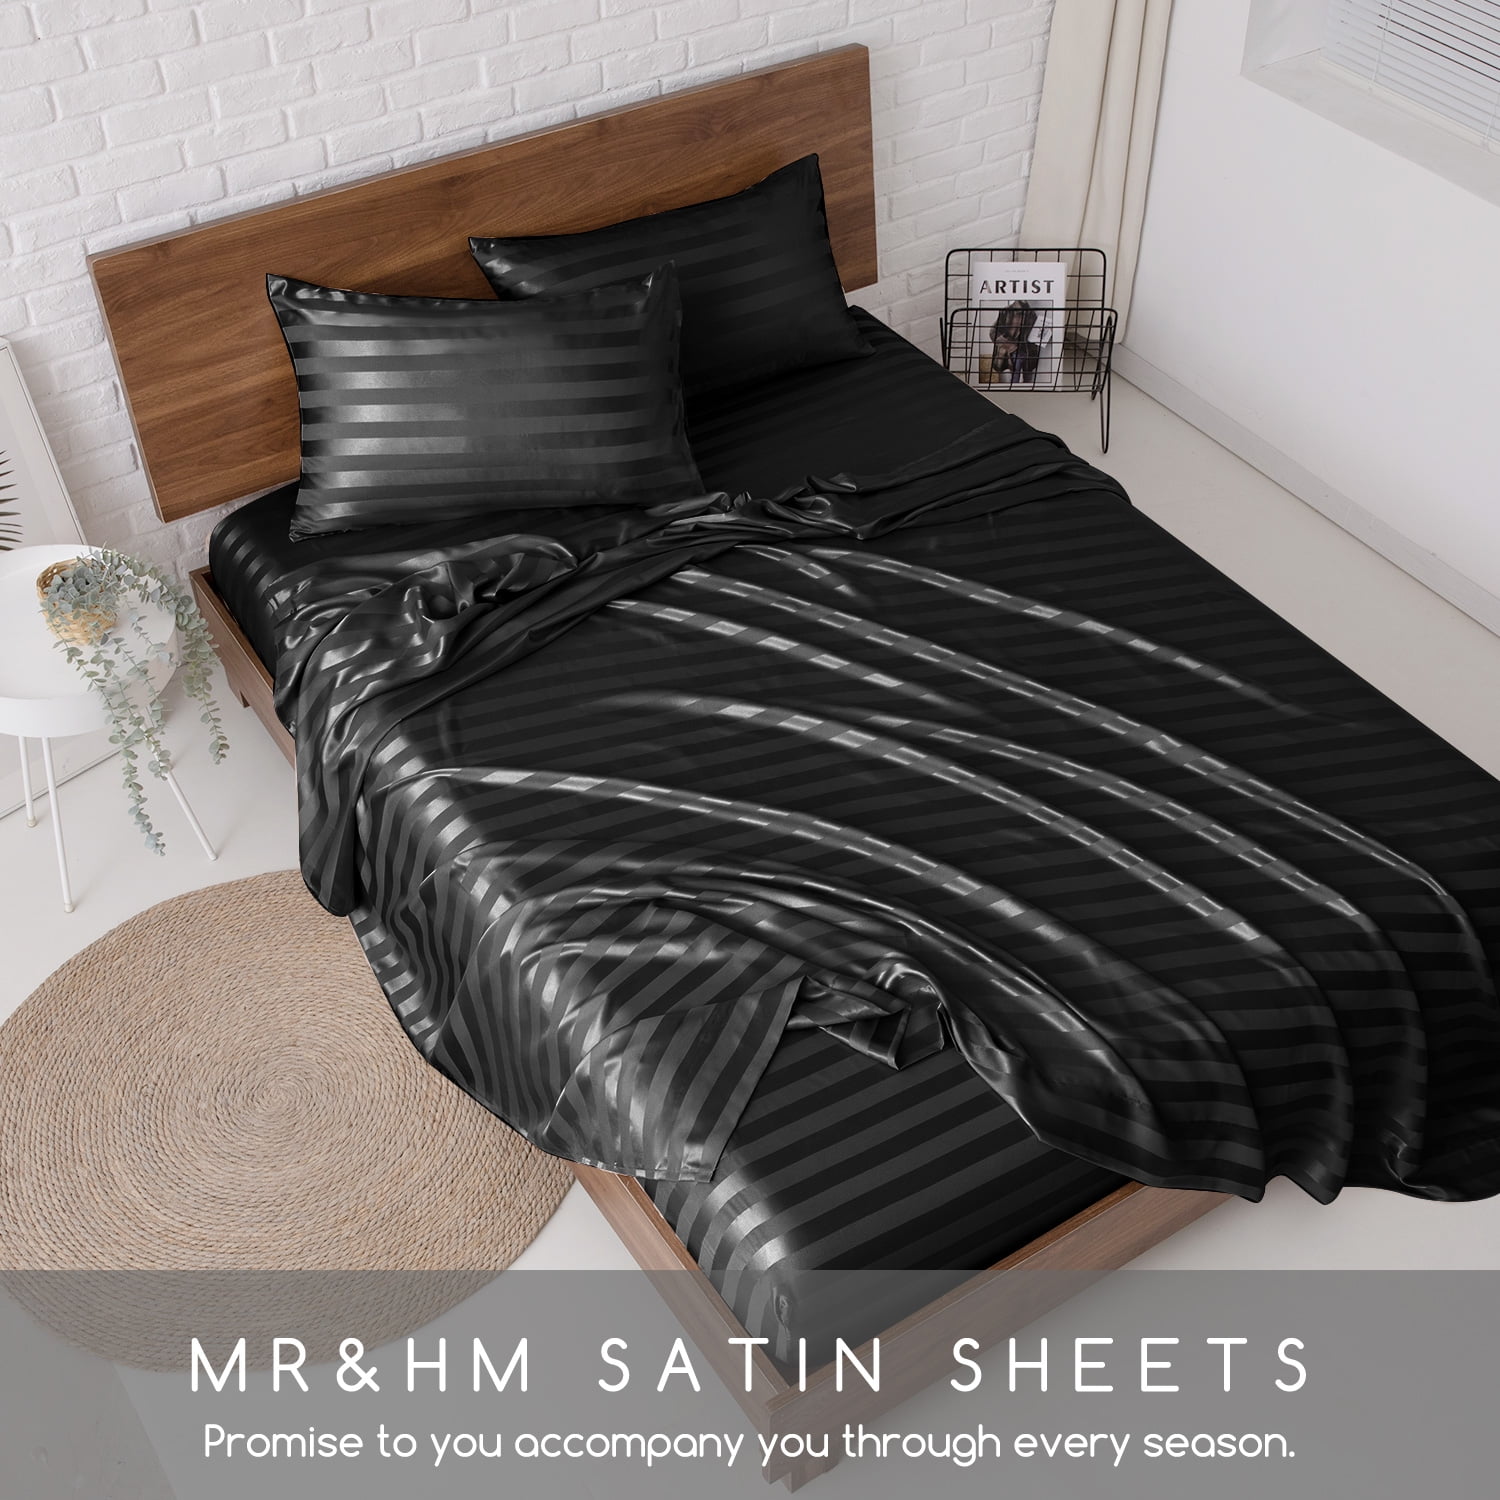 inrichting Gastvrijheid ambitie MR&HM 600 Thread Count 4 Piece Bedding Sets Queen with Flat Sheet and  Fitted Sheet and Pillowcases - Walmart.com